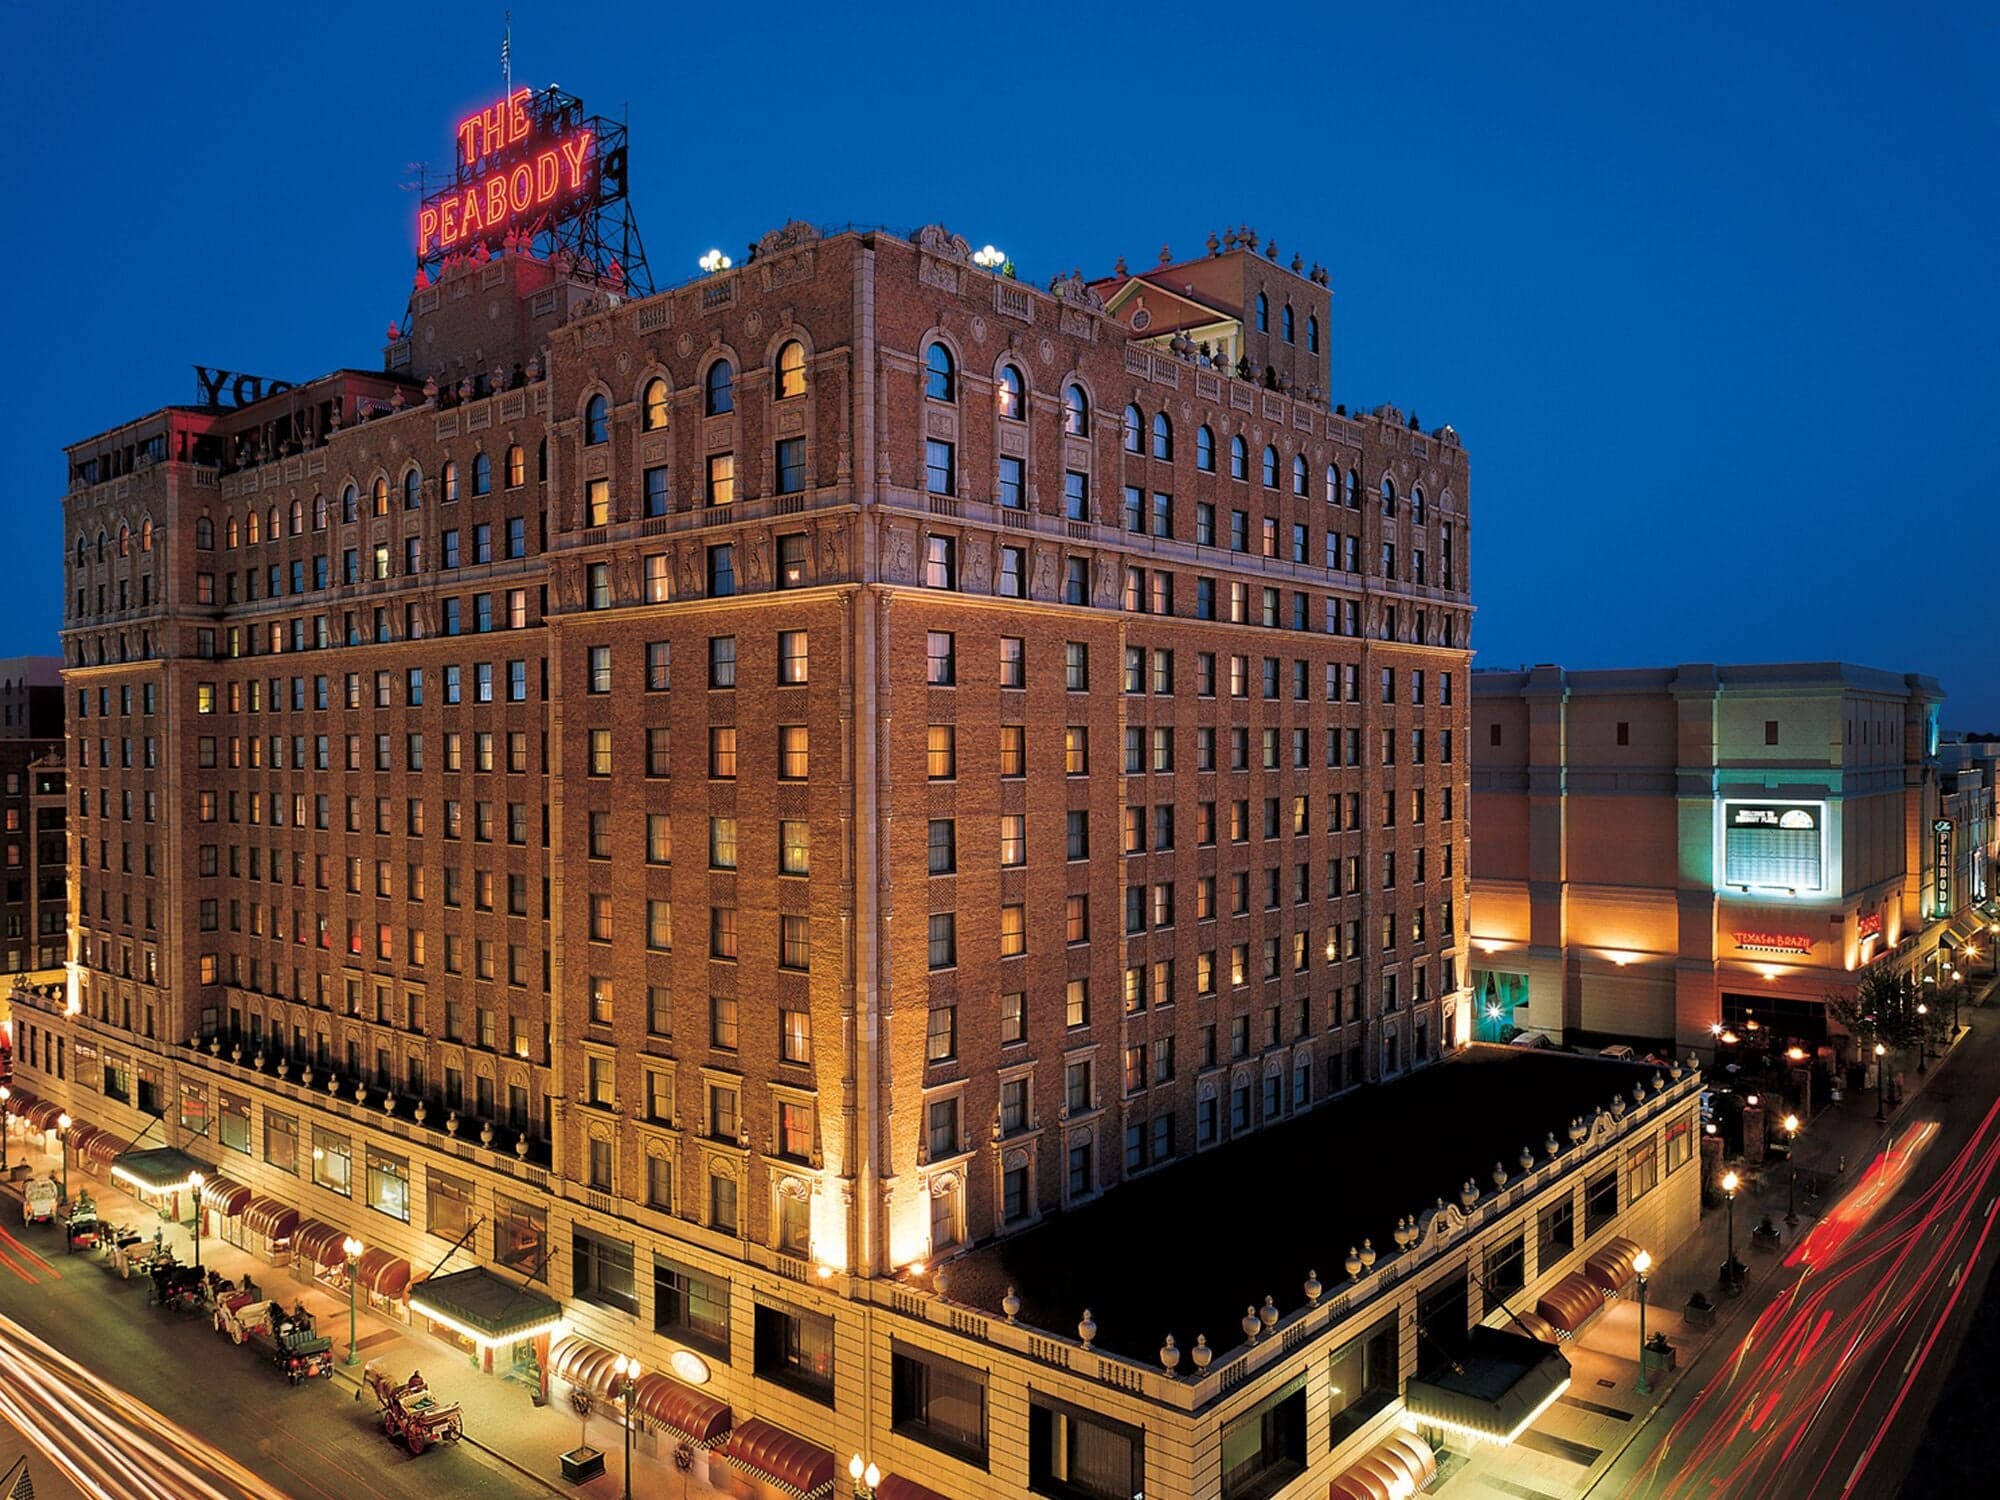 good taste awards, hotel with the most character, peabody memphis